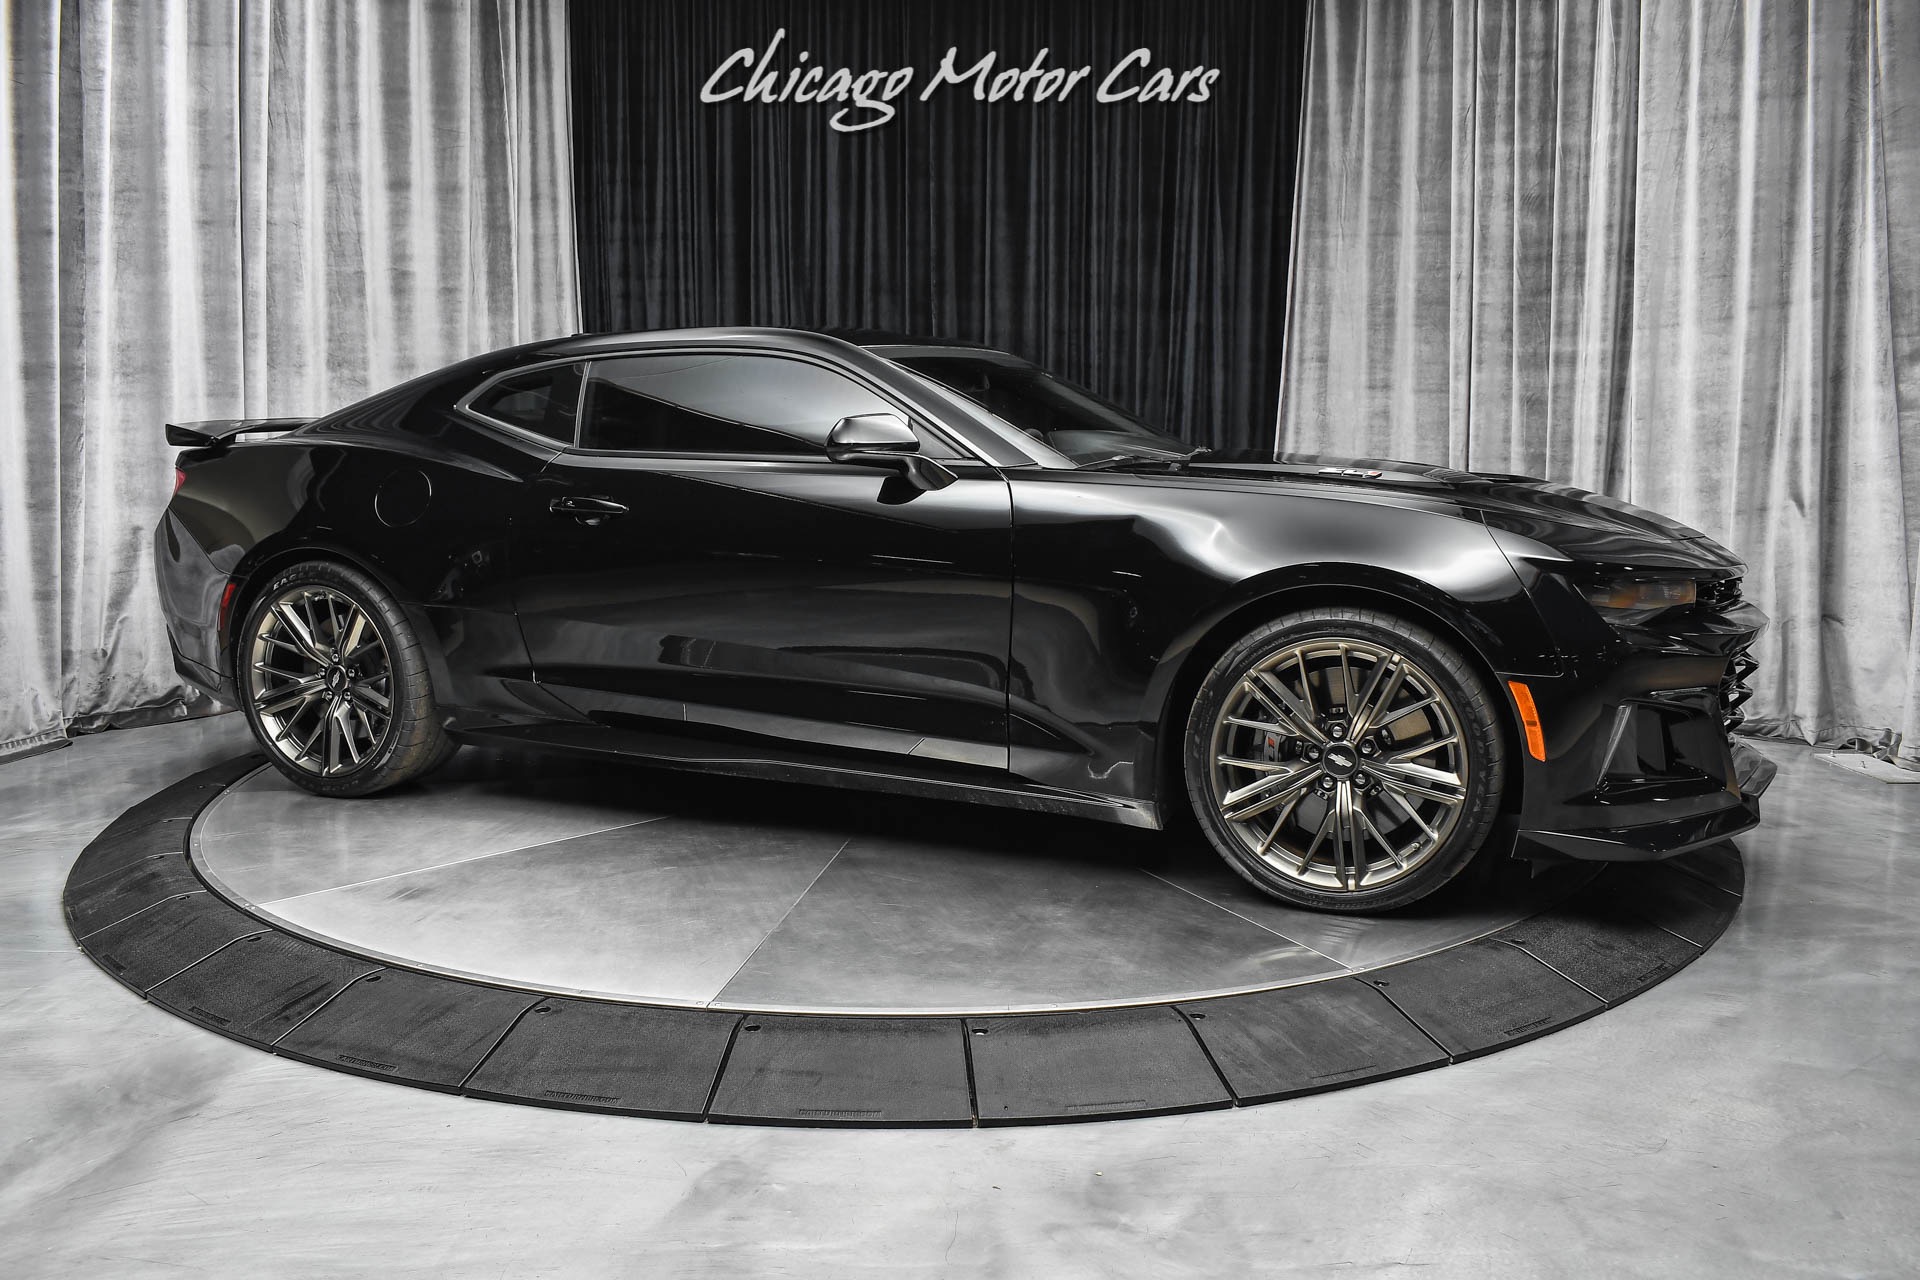 Used-2017-Chevrolet-Camaro-ZL1-Coupe-10-SPEED-AUTOMATIC-TRANS-ONLY-7500-MILES-62L-SUPERCHARGED-V8